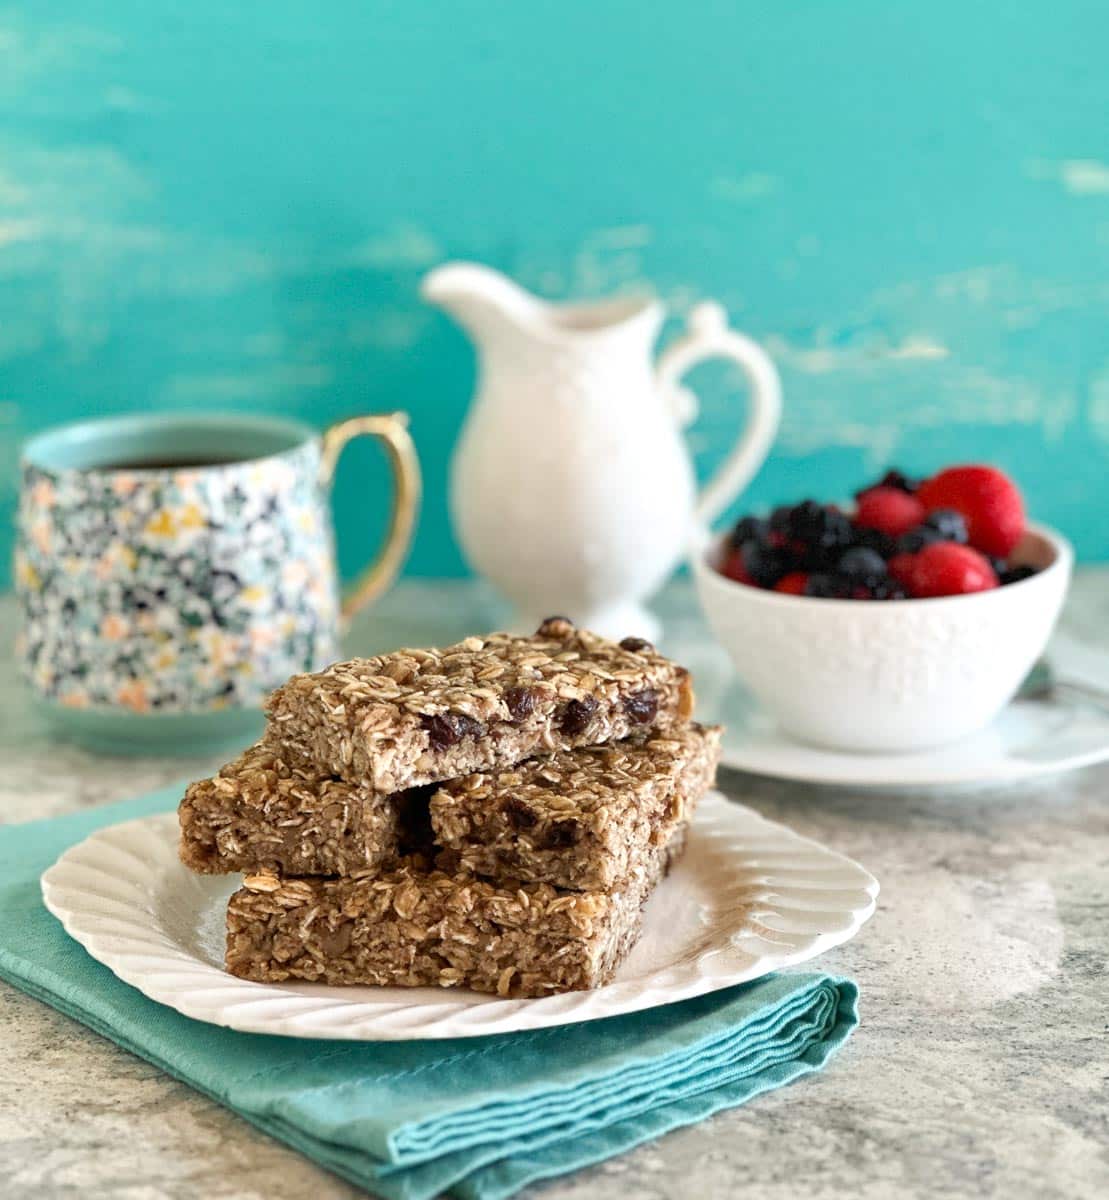 Low FODMAP Breakfast Bars stacked on white plate, with aqua napkin; coffee cup in back.